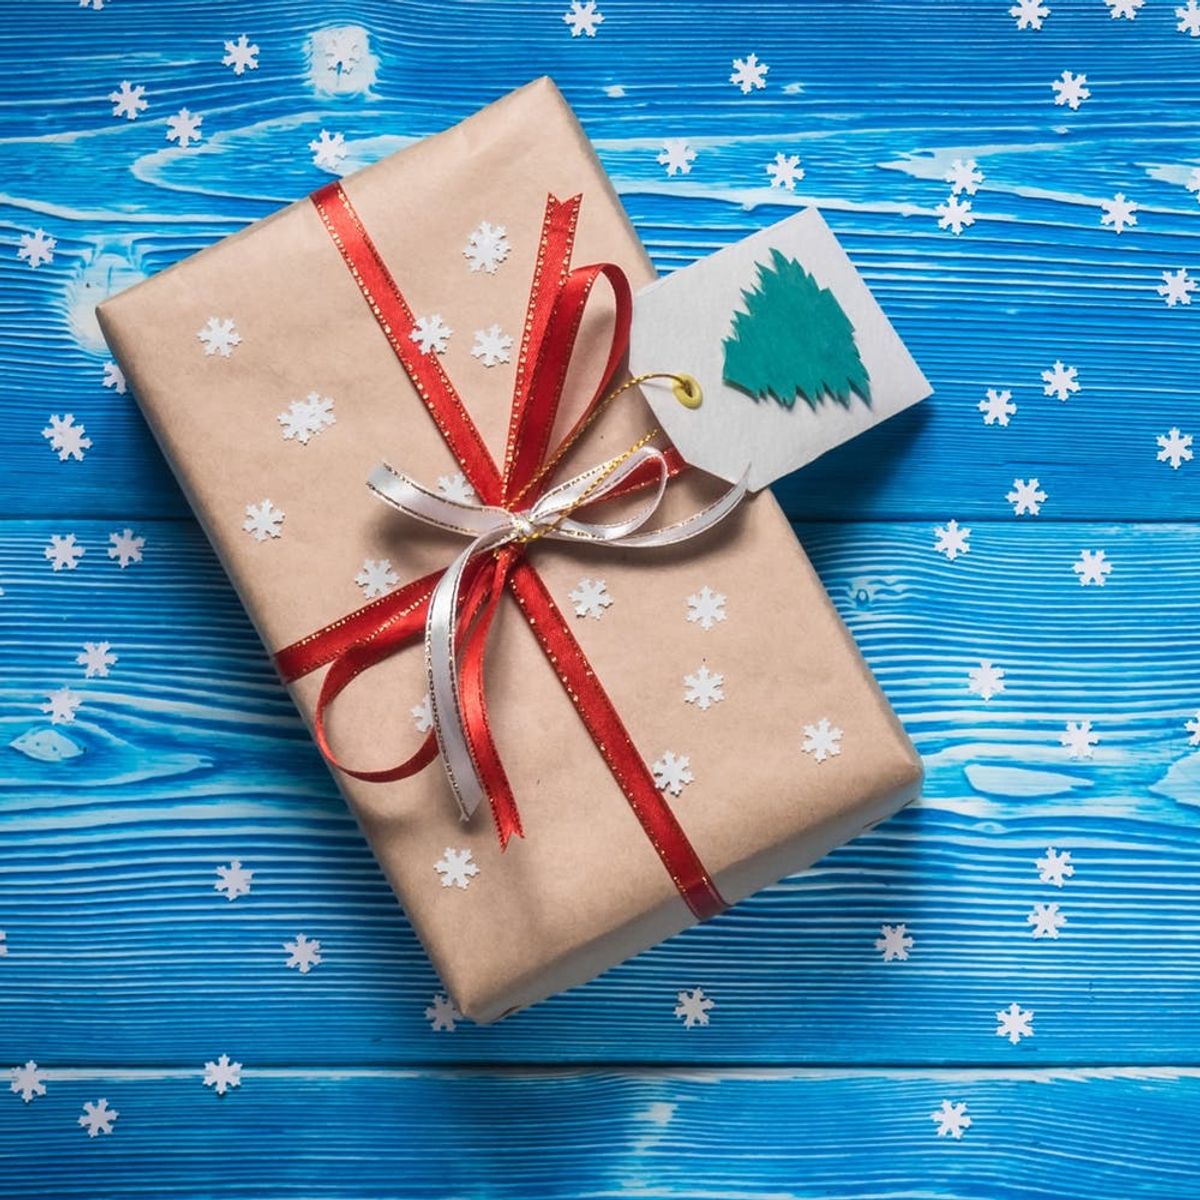 7 Easy Ways to Make a Big Impact When You Give Back This Holiday